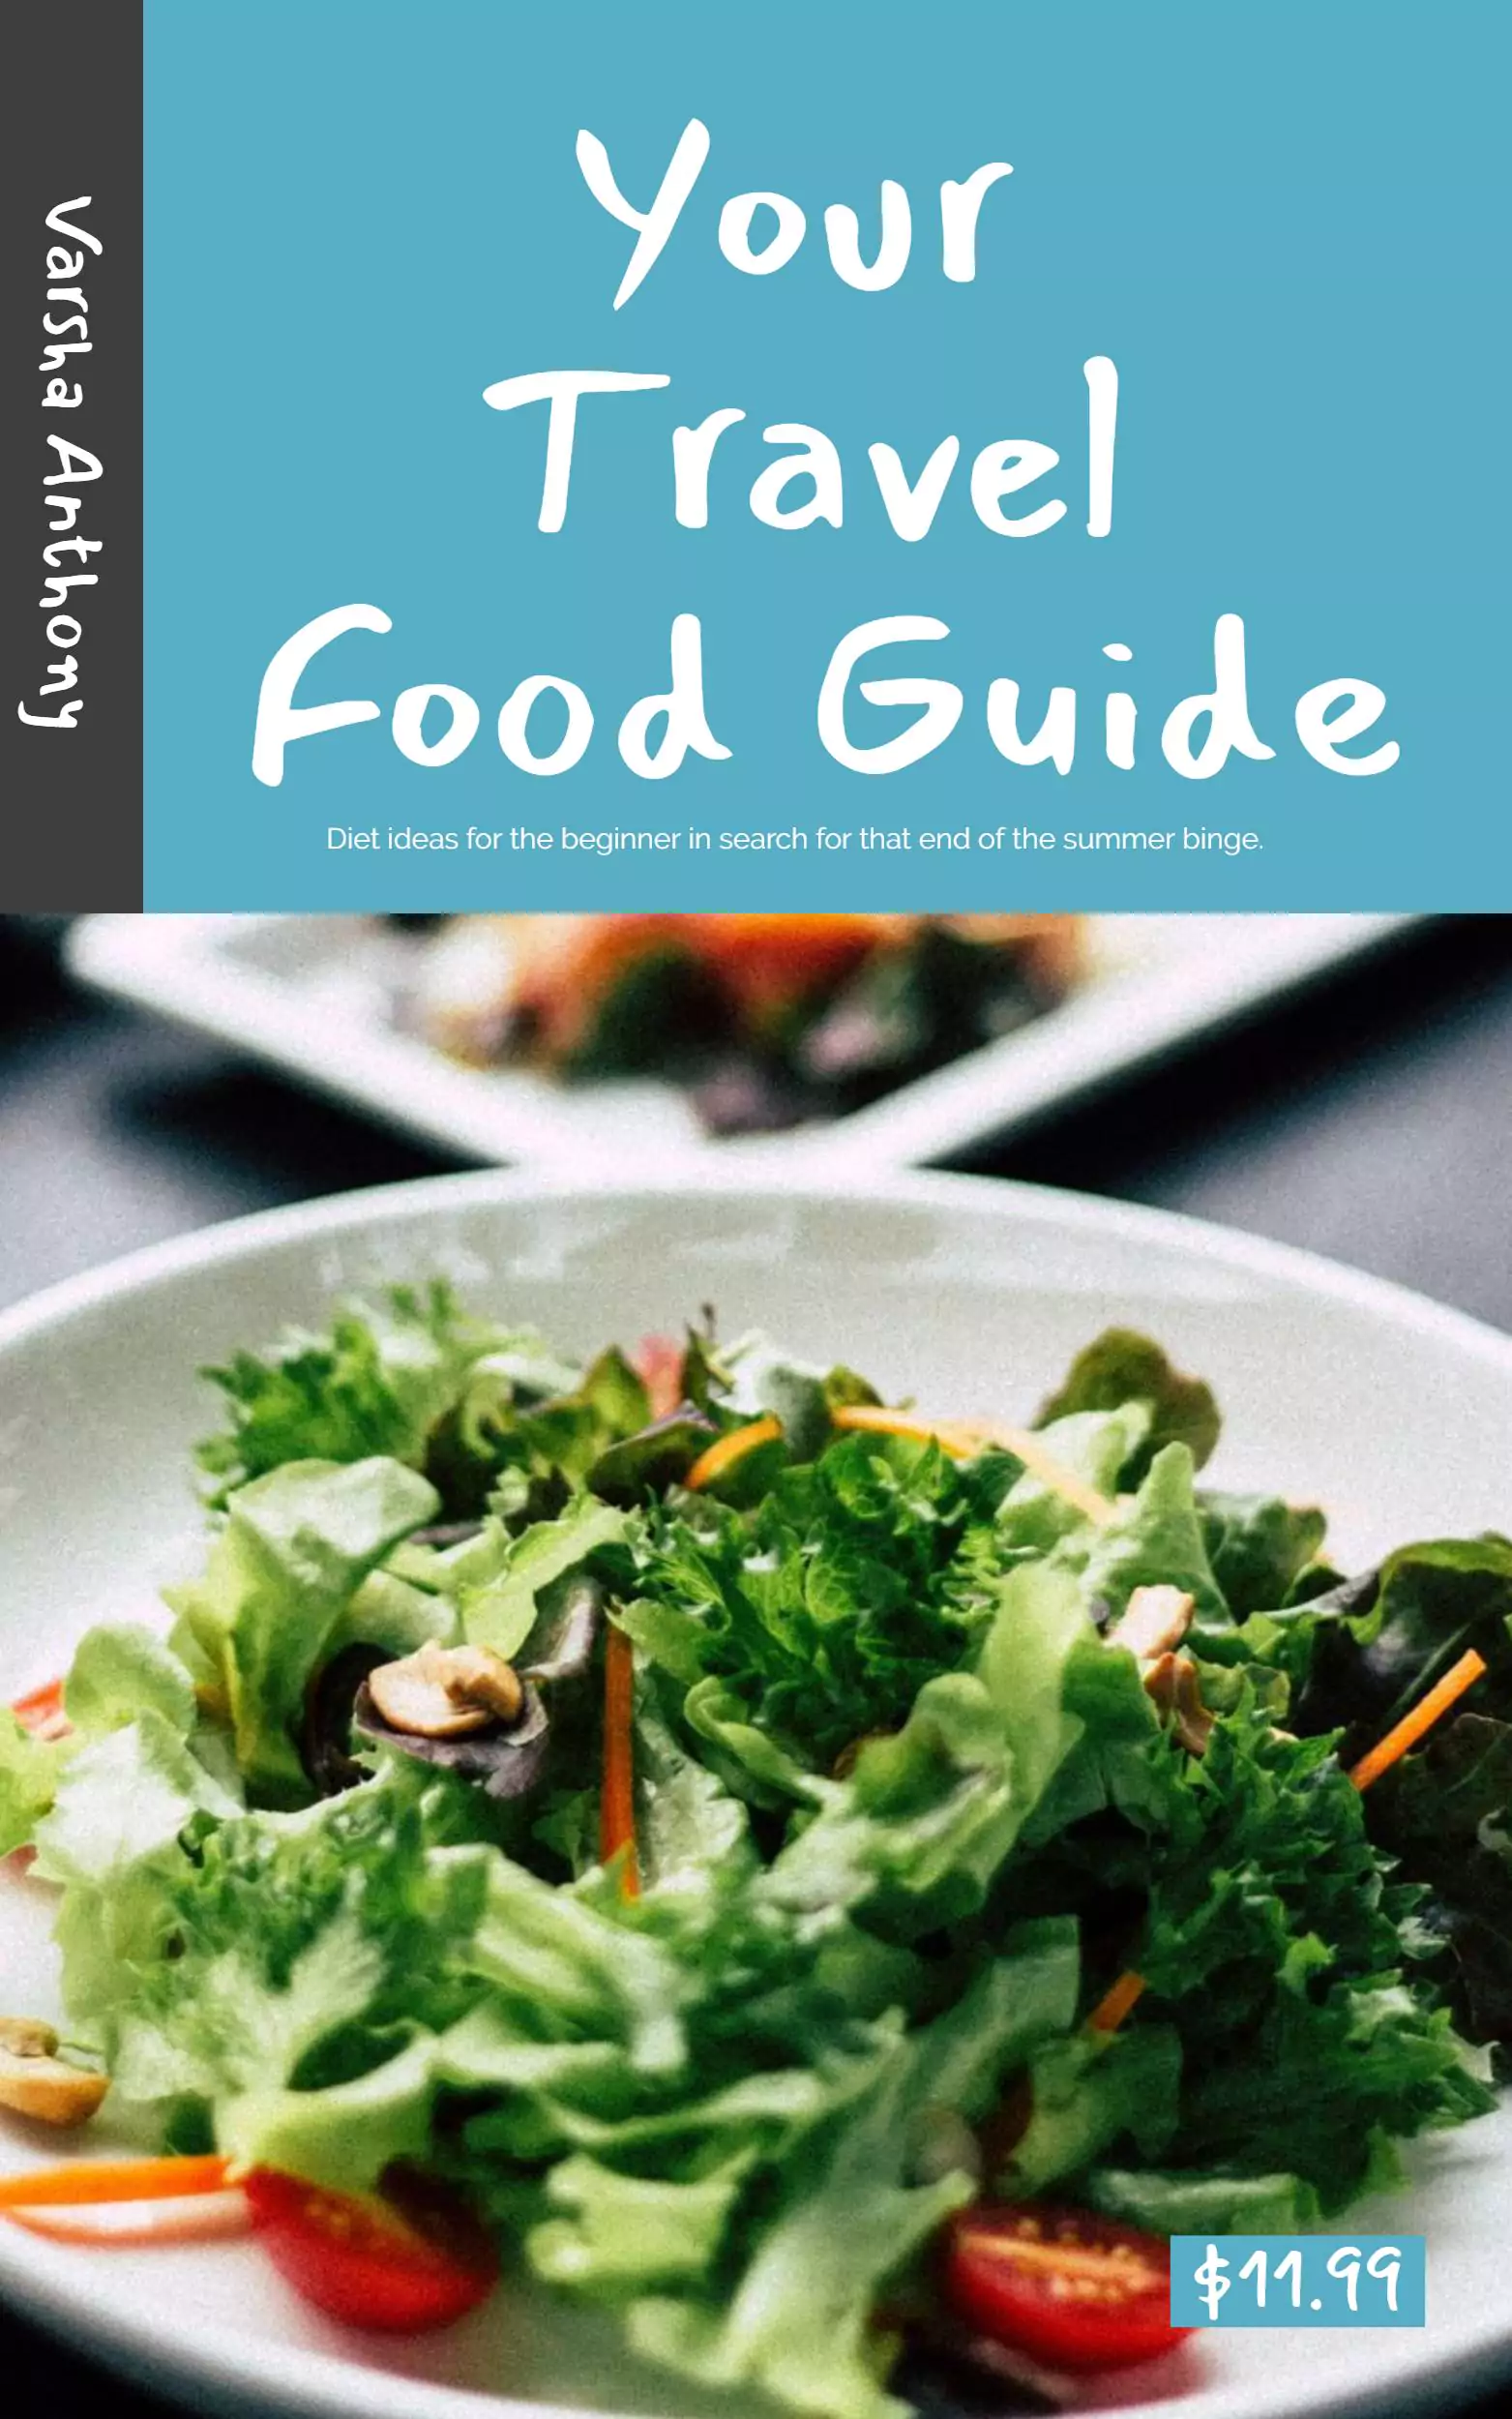 Your Travel Food Guide